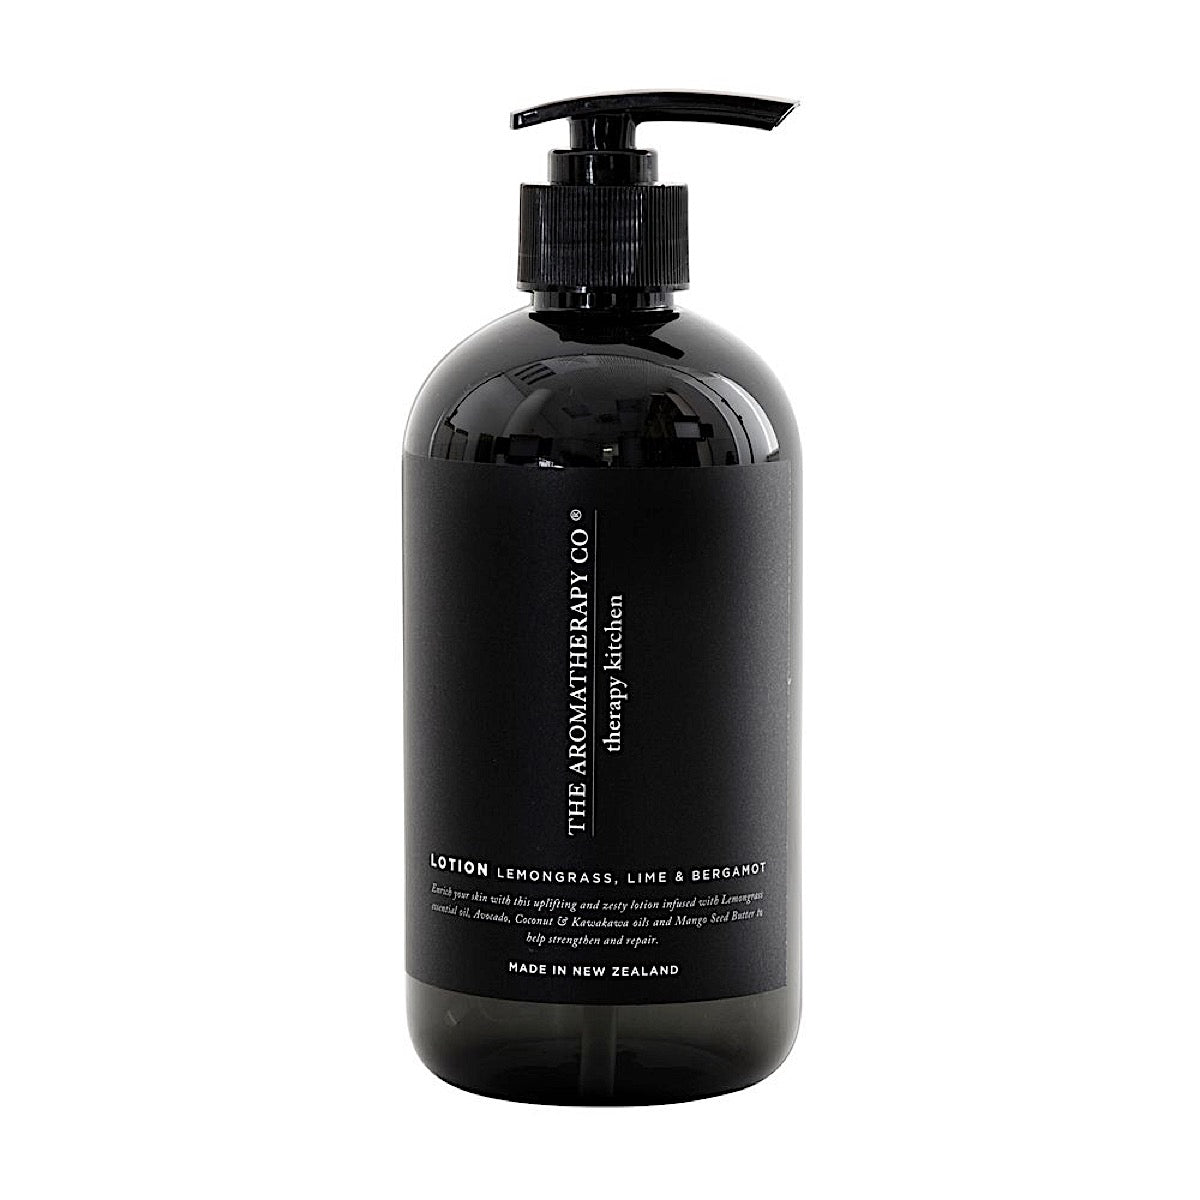 The Aromatherapy Co Therapy Kitchen Lemongrass, Lime & Bergamot Hand Lotion at More Than Just A Gift